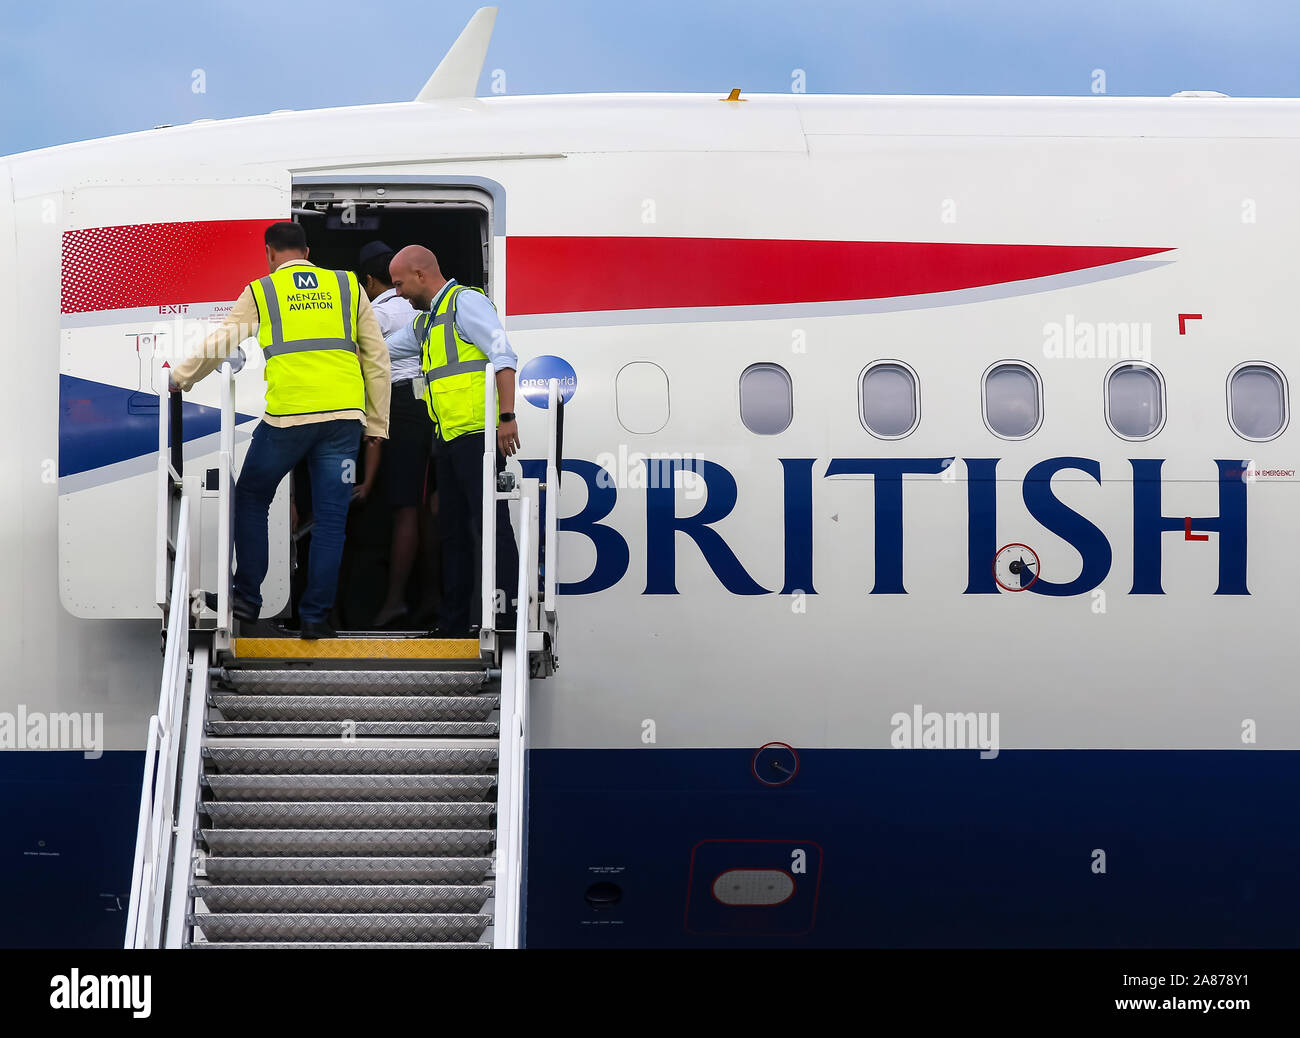 Bucharest, Romania - July 15, 2019: Ramp agents secures the ladder of British Airways G-EUXG aircraft parked in the VIP reception area of Henri Coan Stock Photo